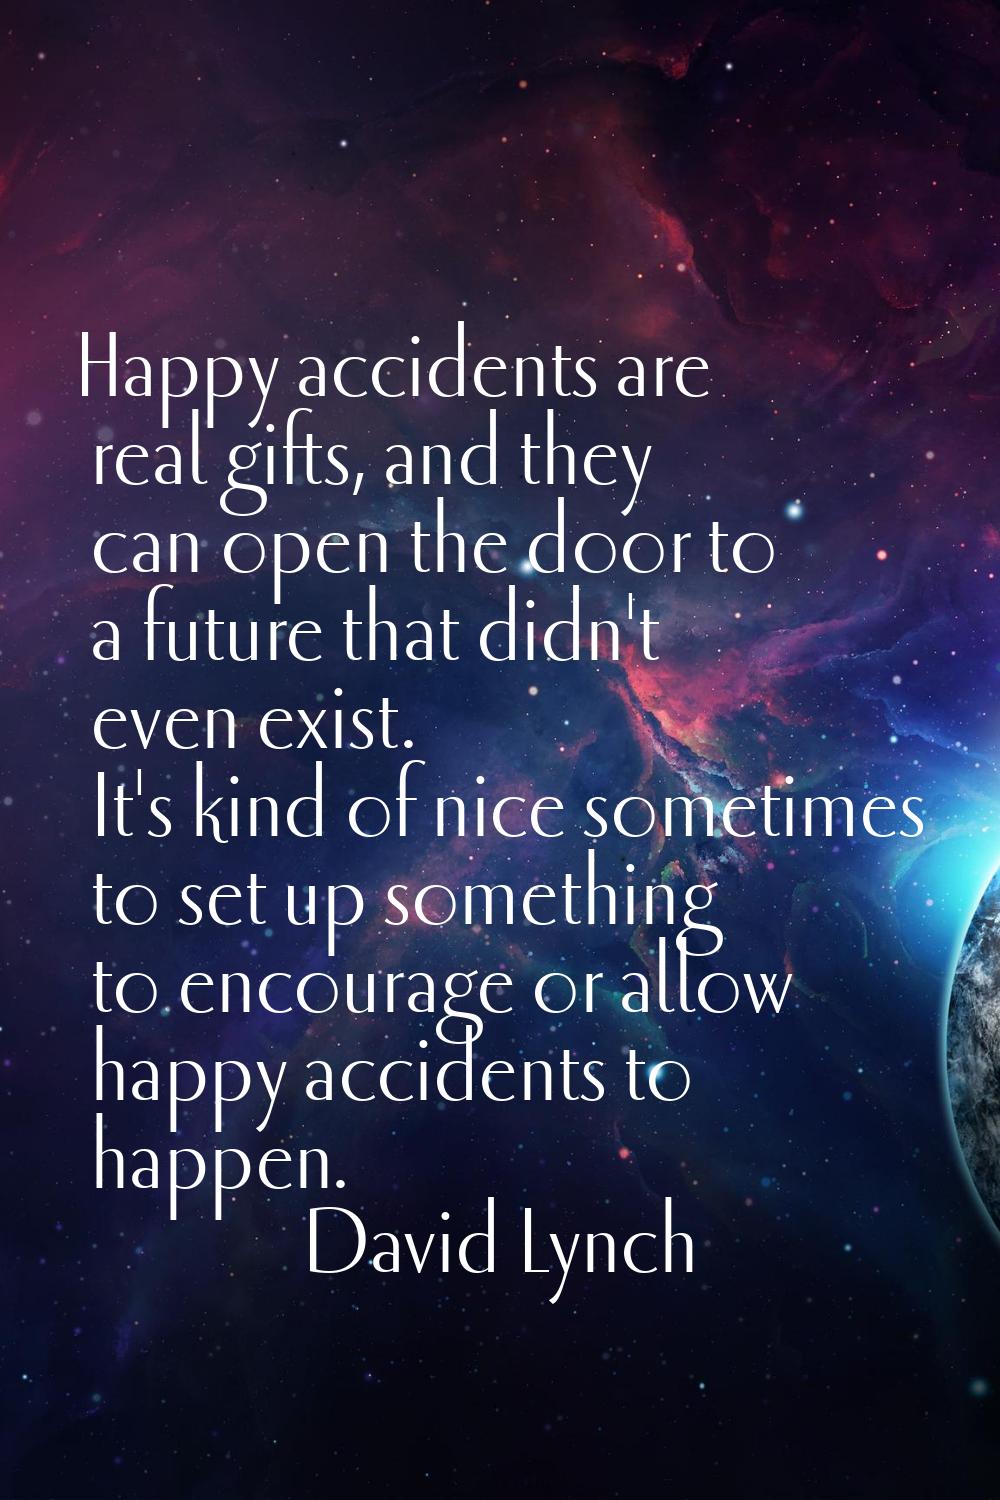 Happy accidents are real gifts, and they can open the door to a future that didn't even exist. It's